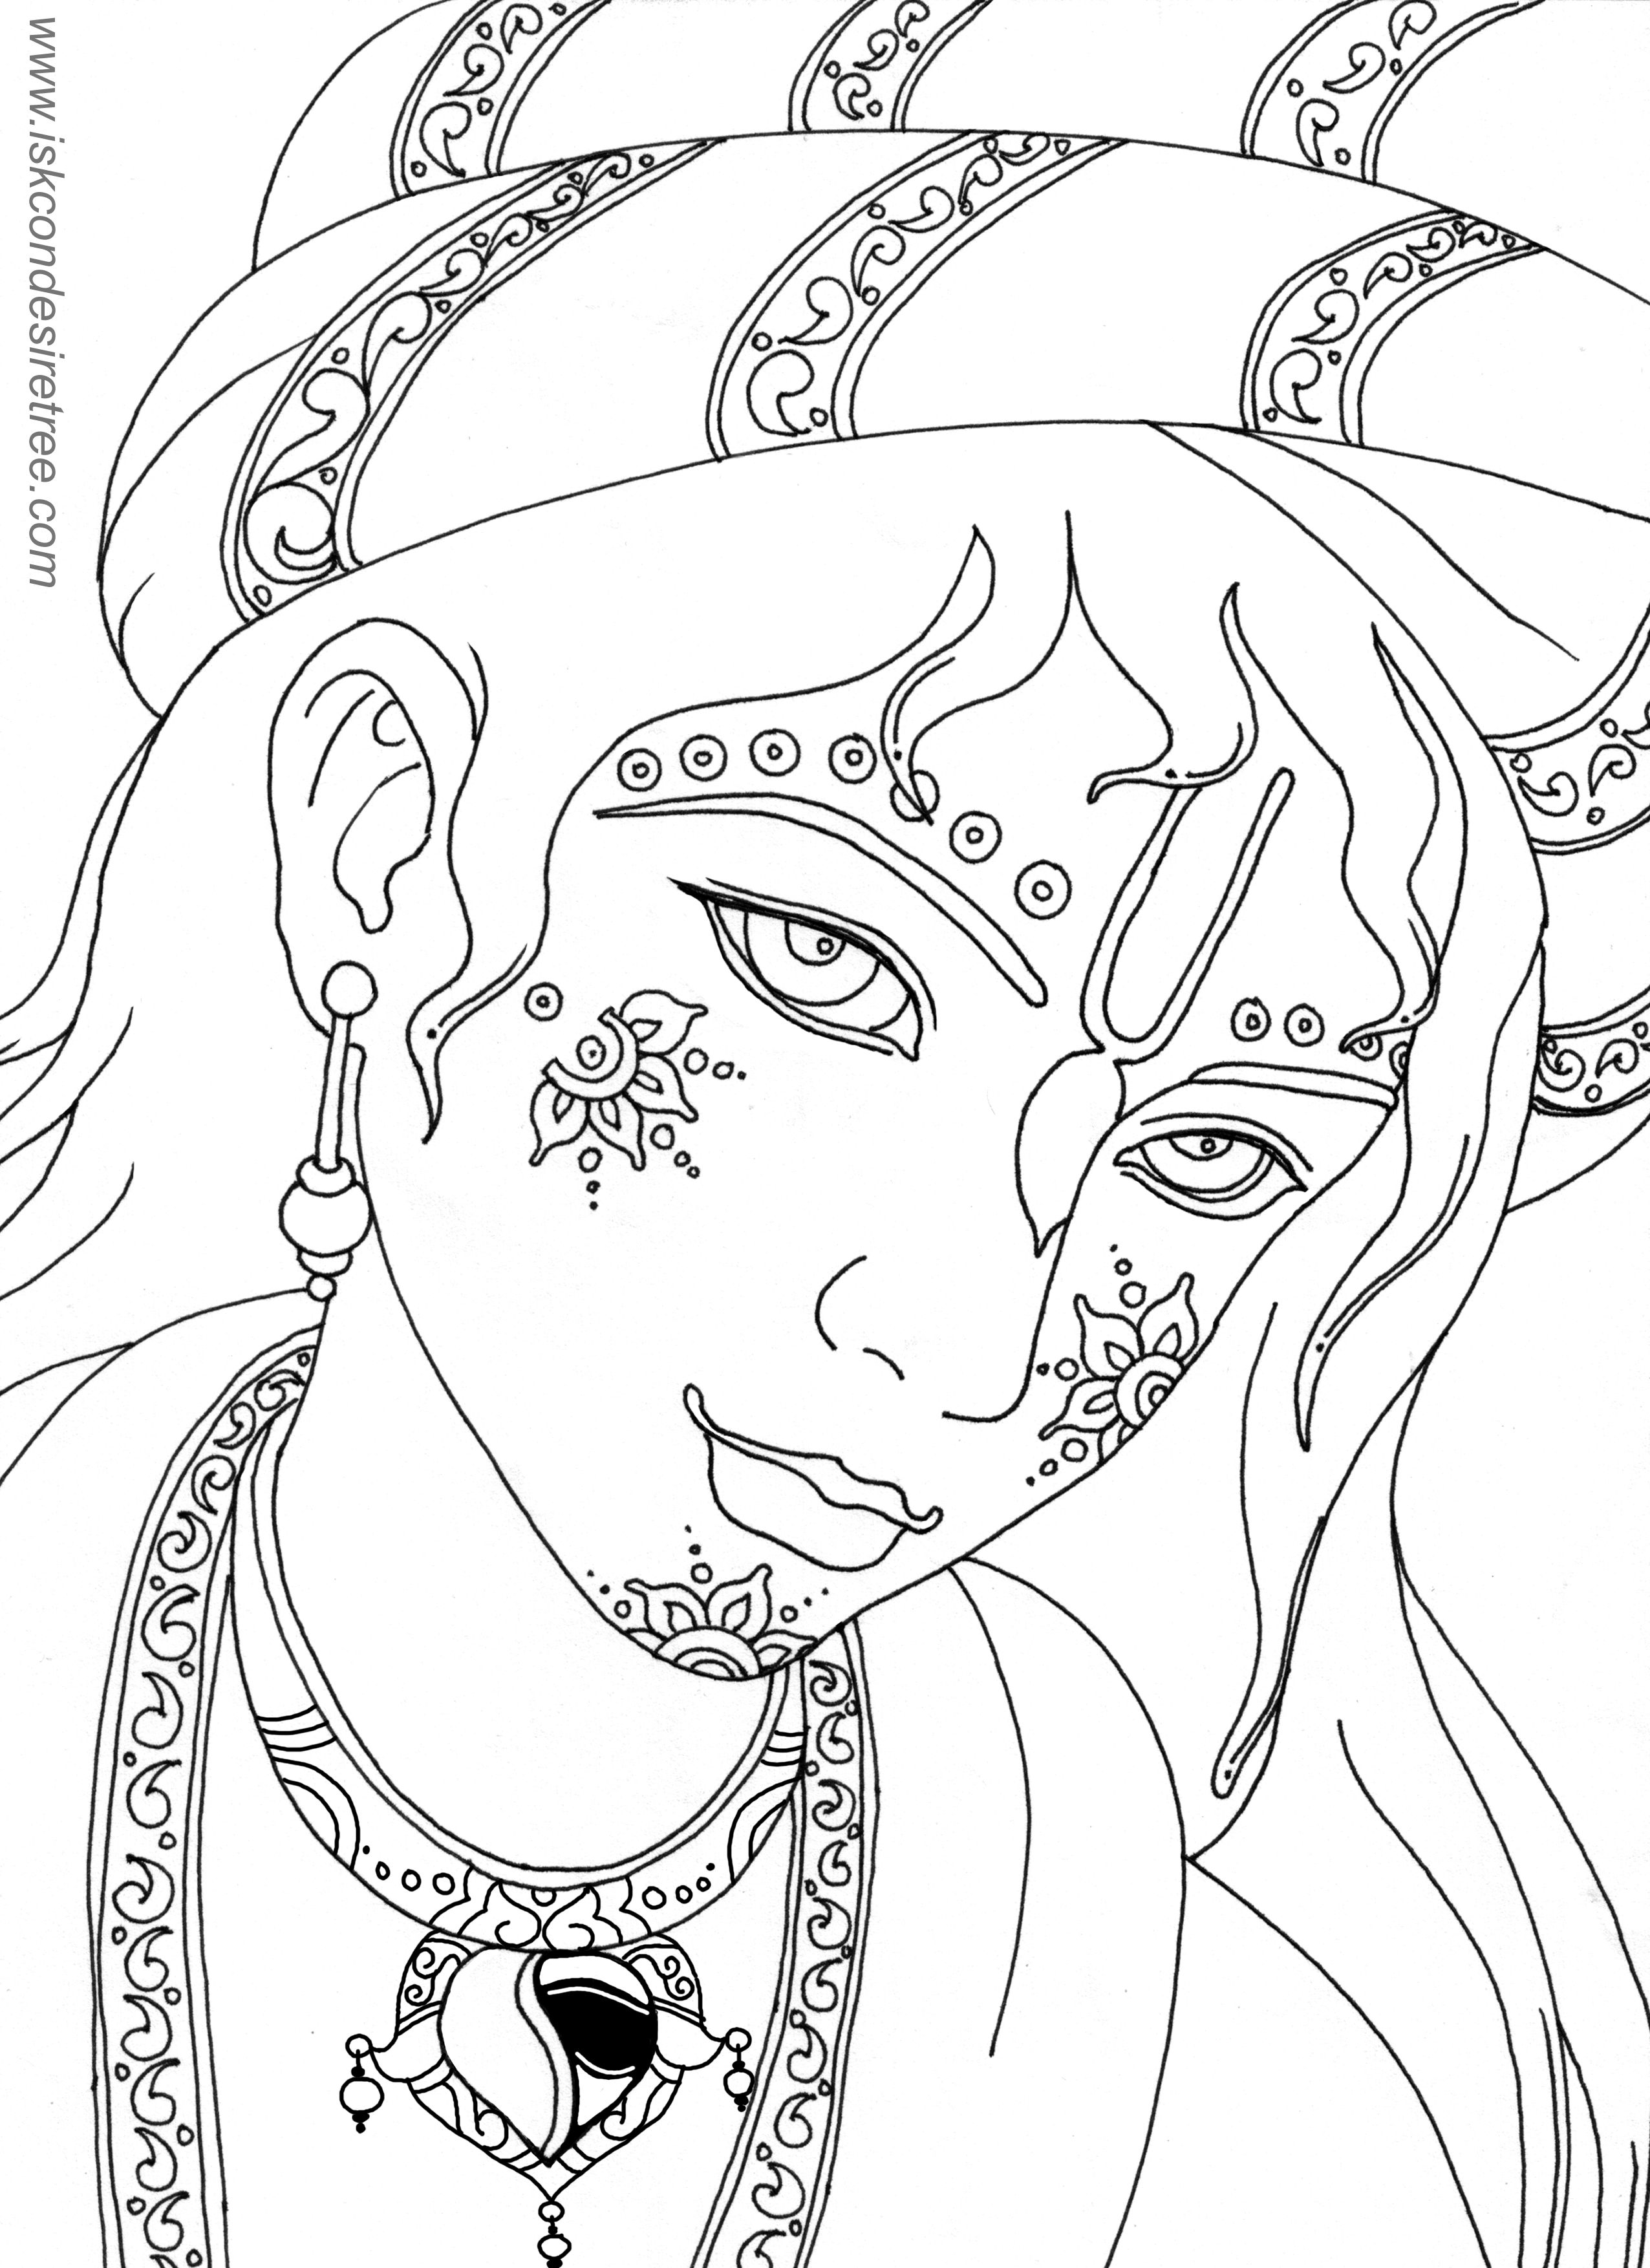 krishna coloring - Google Search | Coloring pages, Adult coloring ...